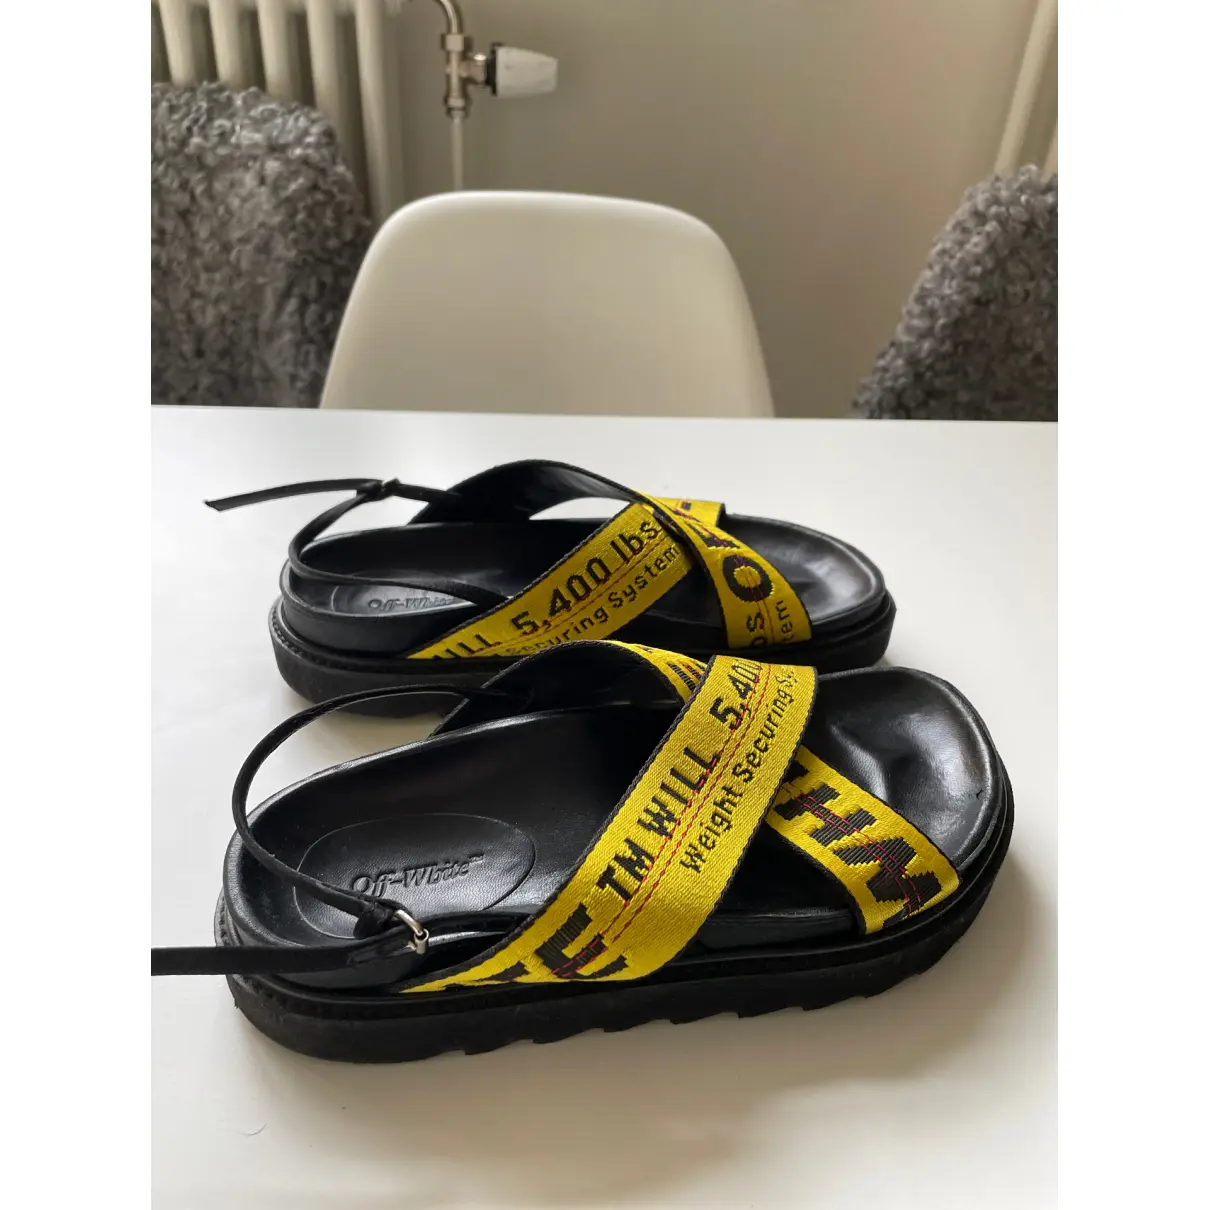 Buy Off-White Leather sandal online